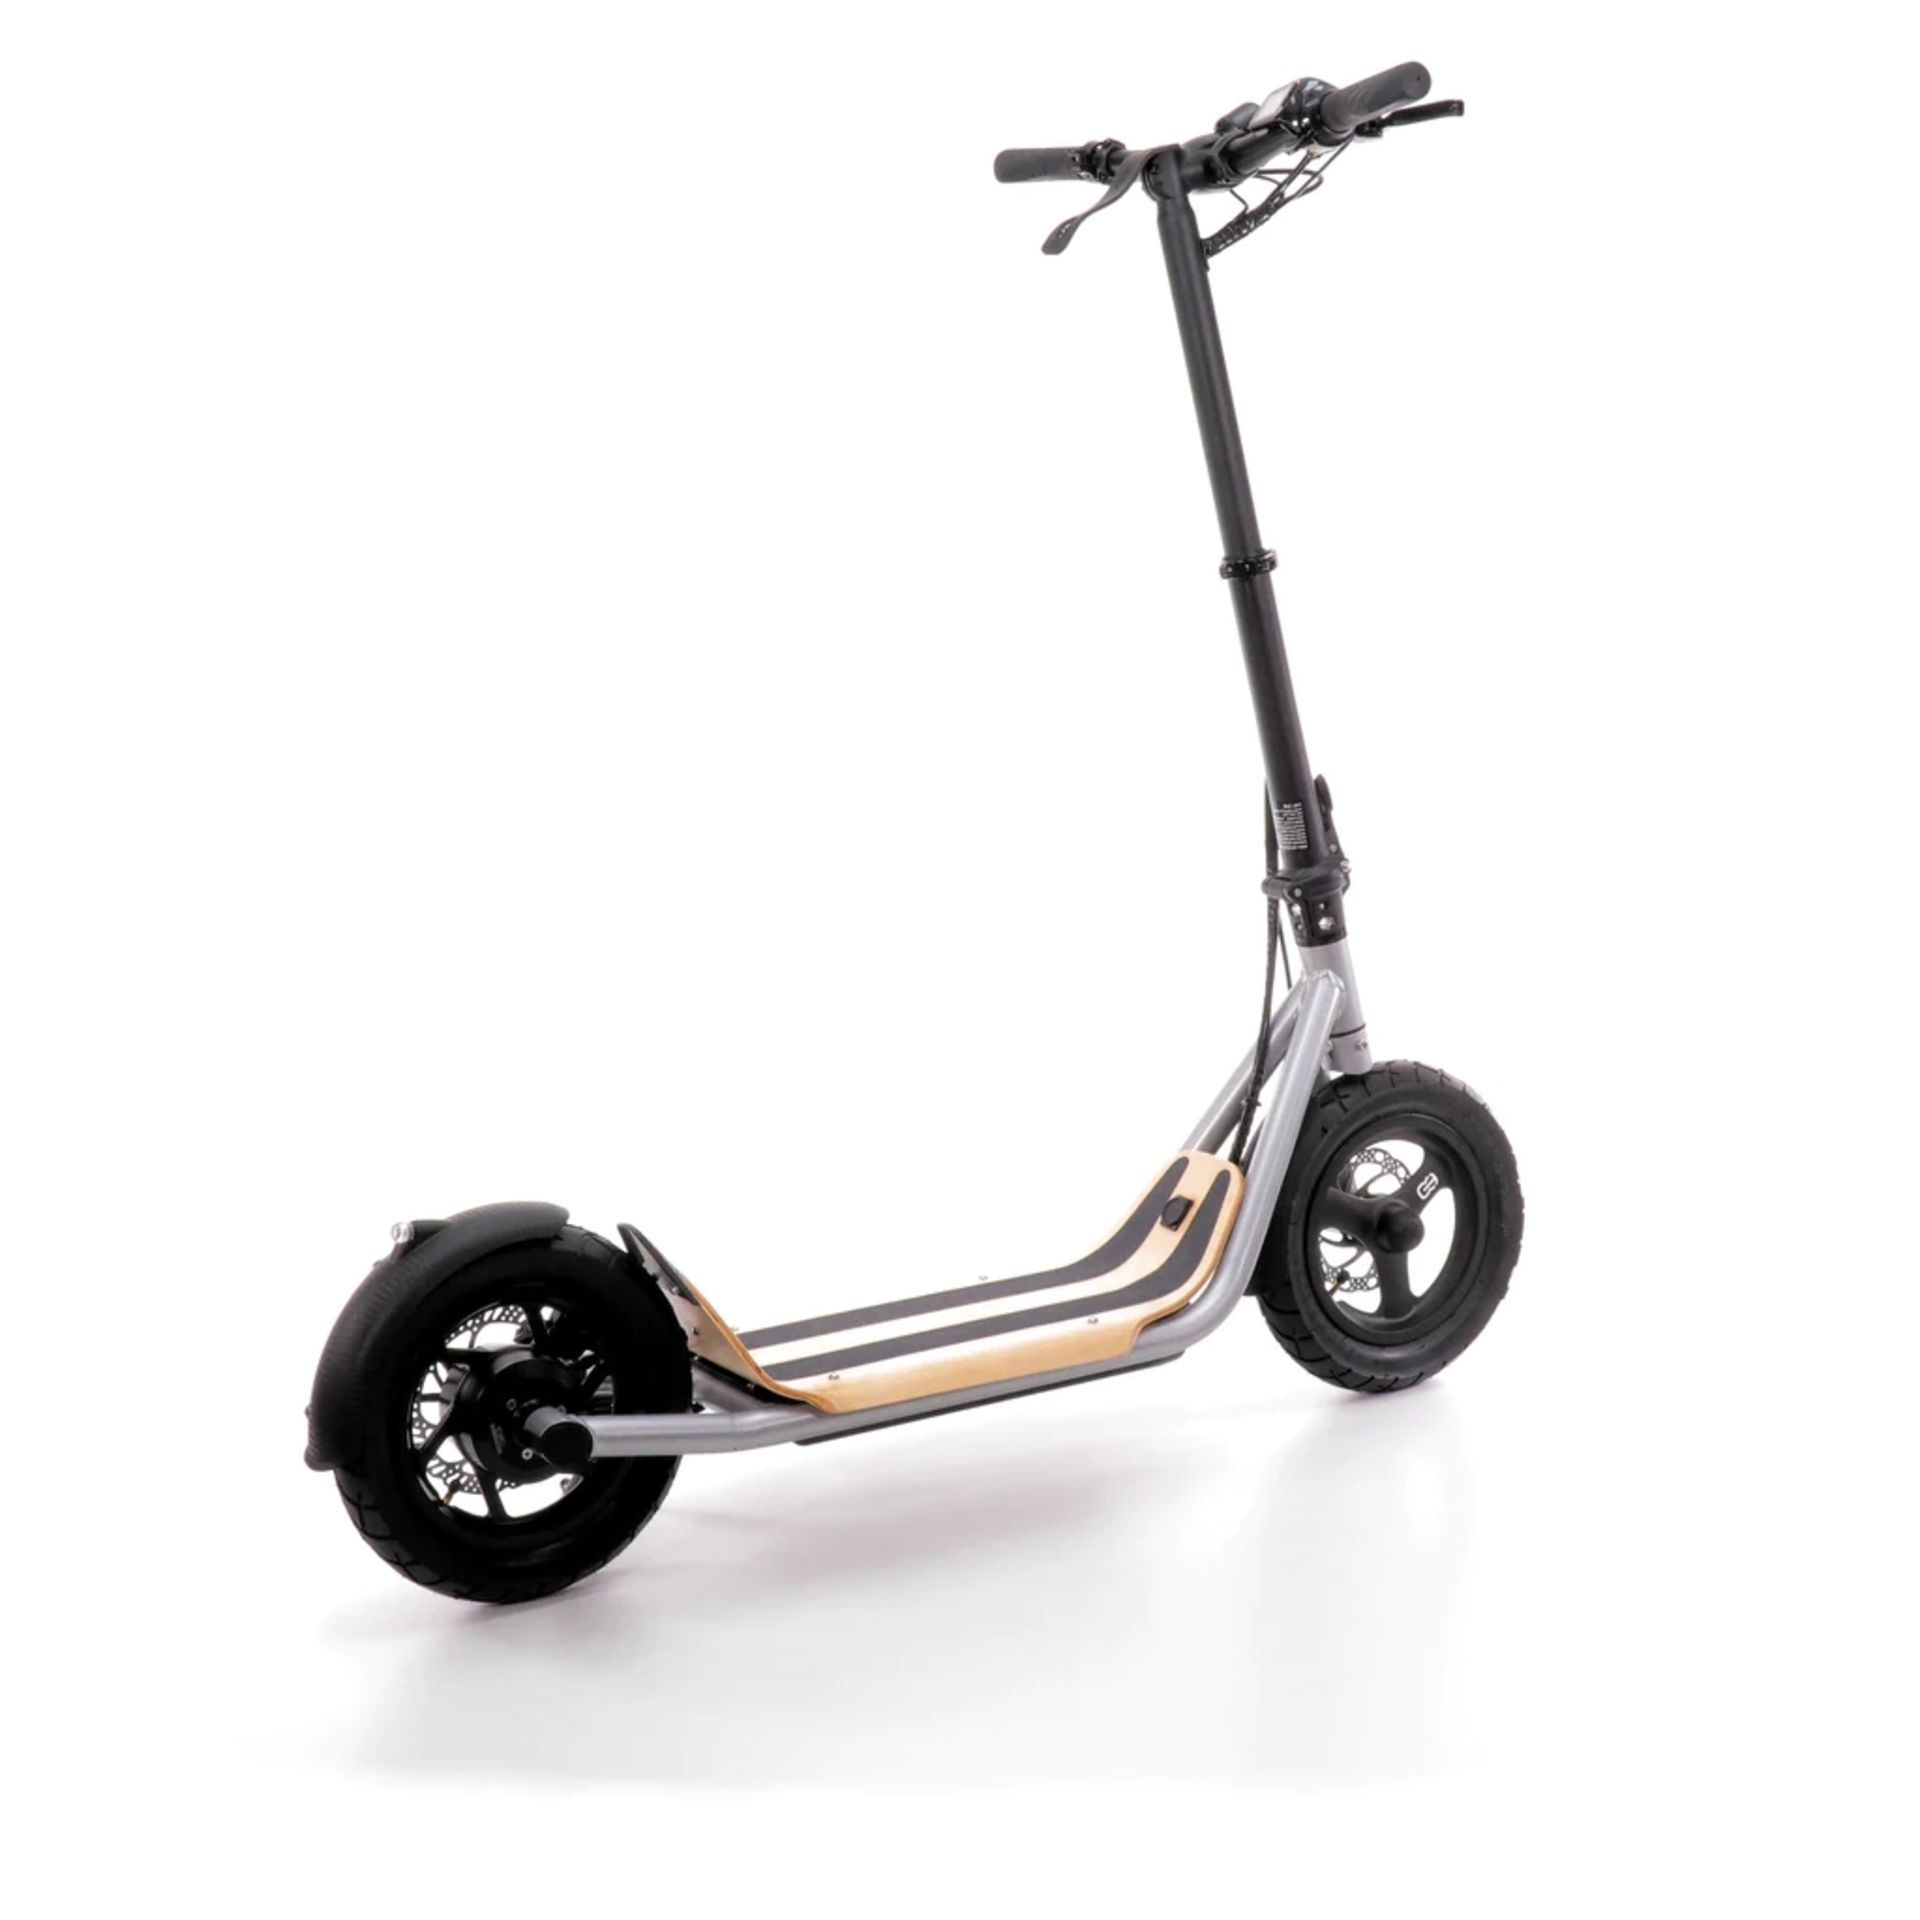 BRAND NEW 8TEV B12 PROXI CLASSIC ELECTRIC SCOOTER SILVER RRP £1299, Perfect city commuter vehicle - Image 2 of 3